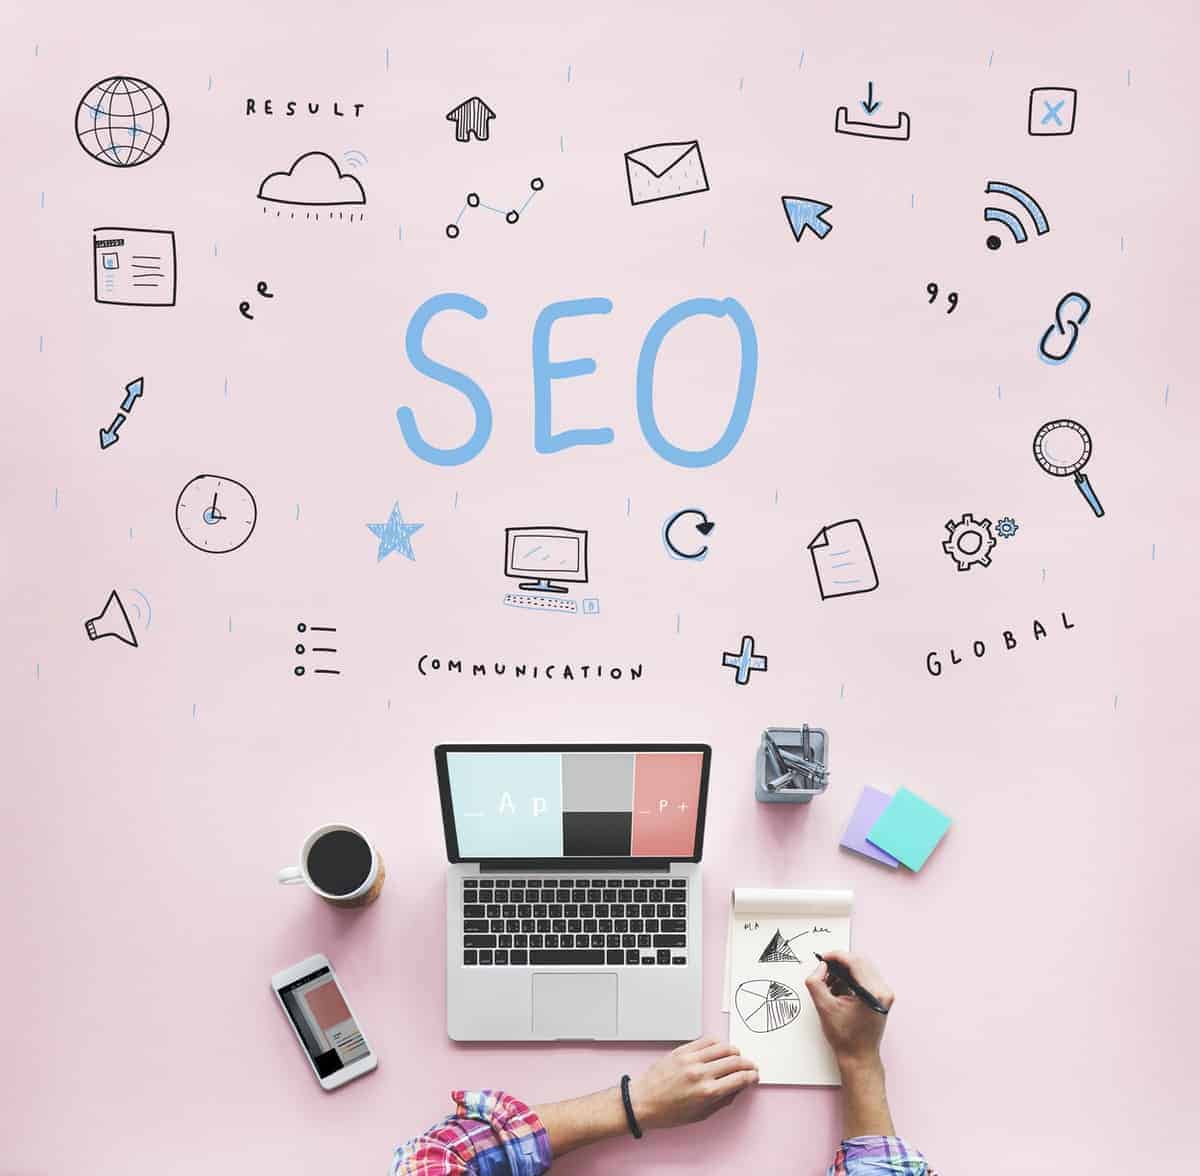 The word SEO in large letters with digital icon symbols on a pink background over a laptop, cup of coffee, and office supplies and two hands writing on a notepad.